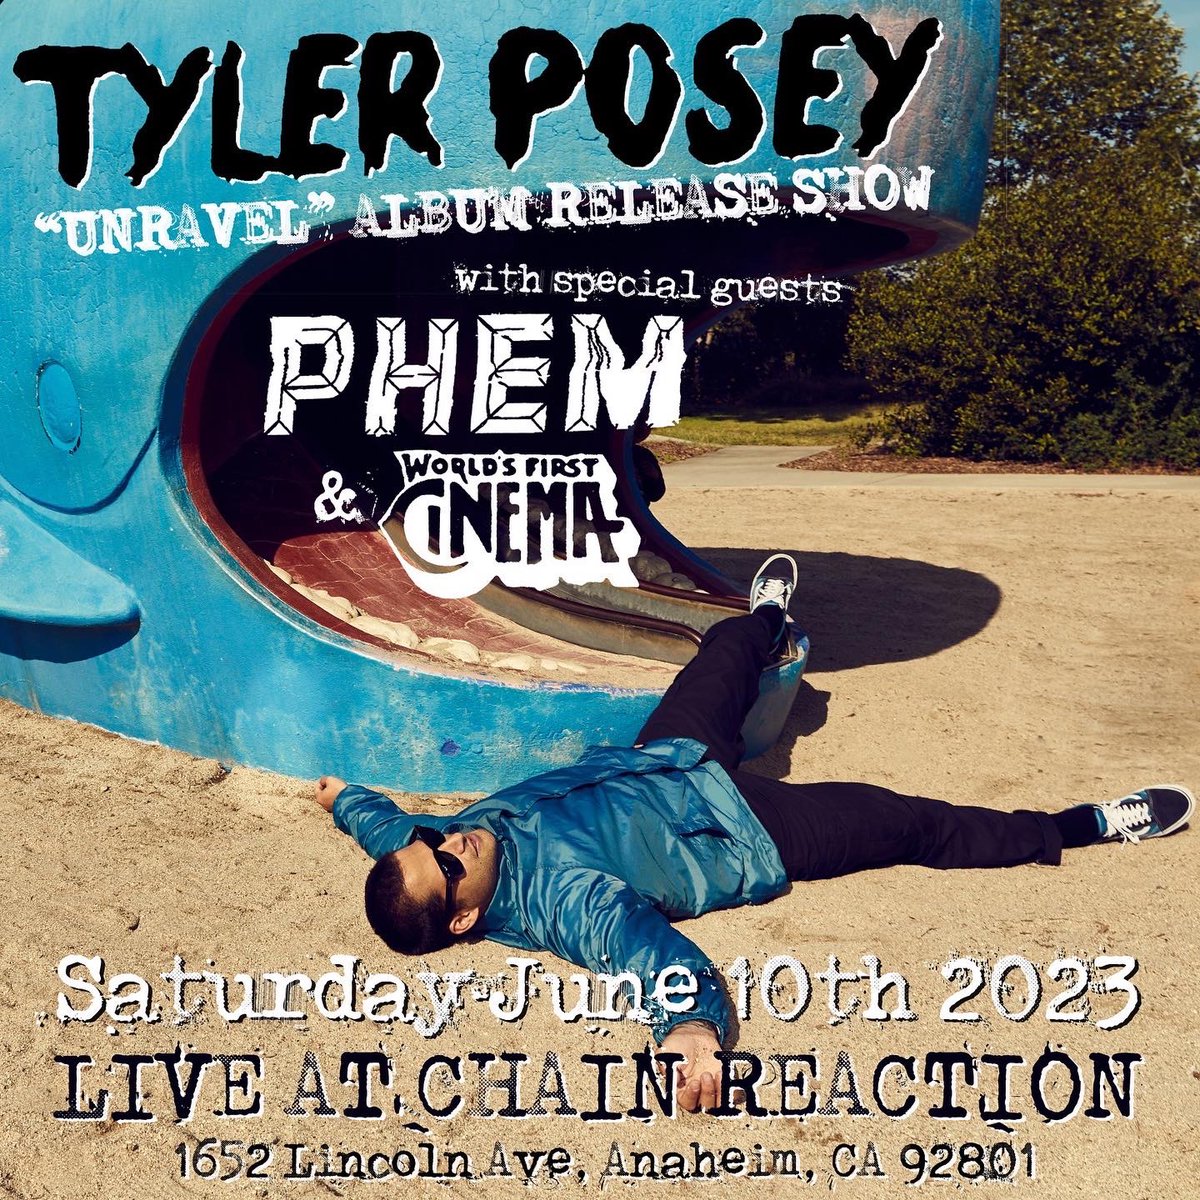 Come party with me and my friends. June 10 at Chain Reaction in Anaheim. Album release show. See you there! Grab your ticket here ffm.link/tylerposey